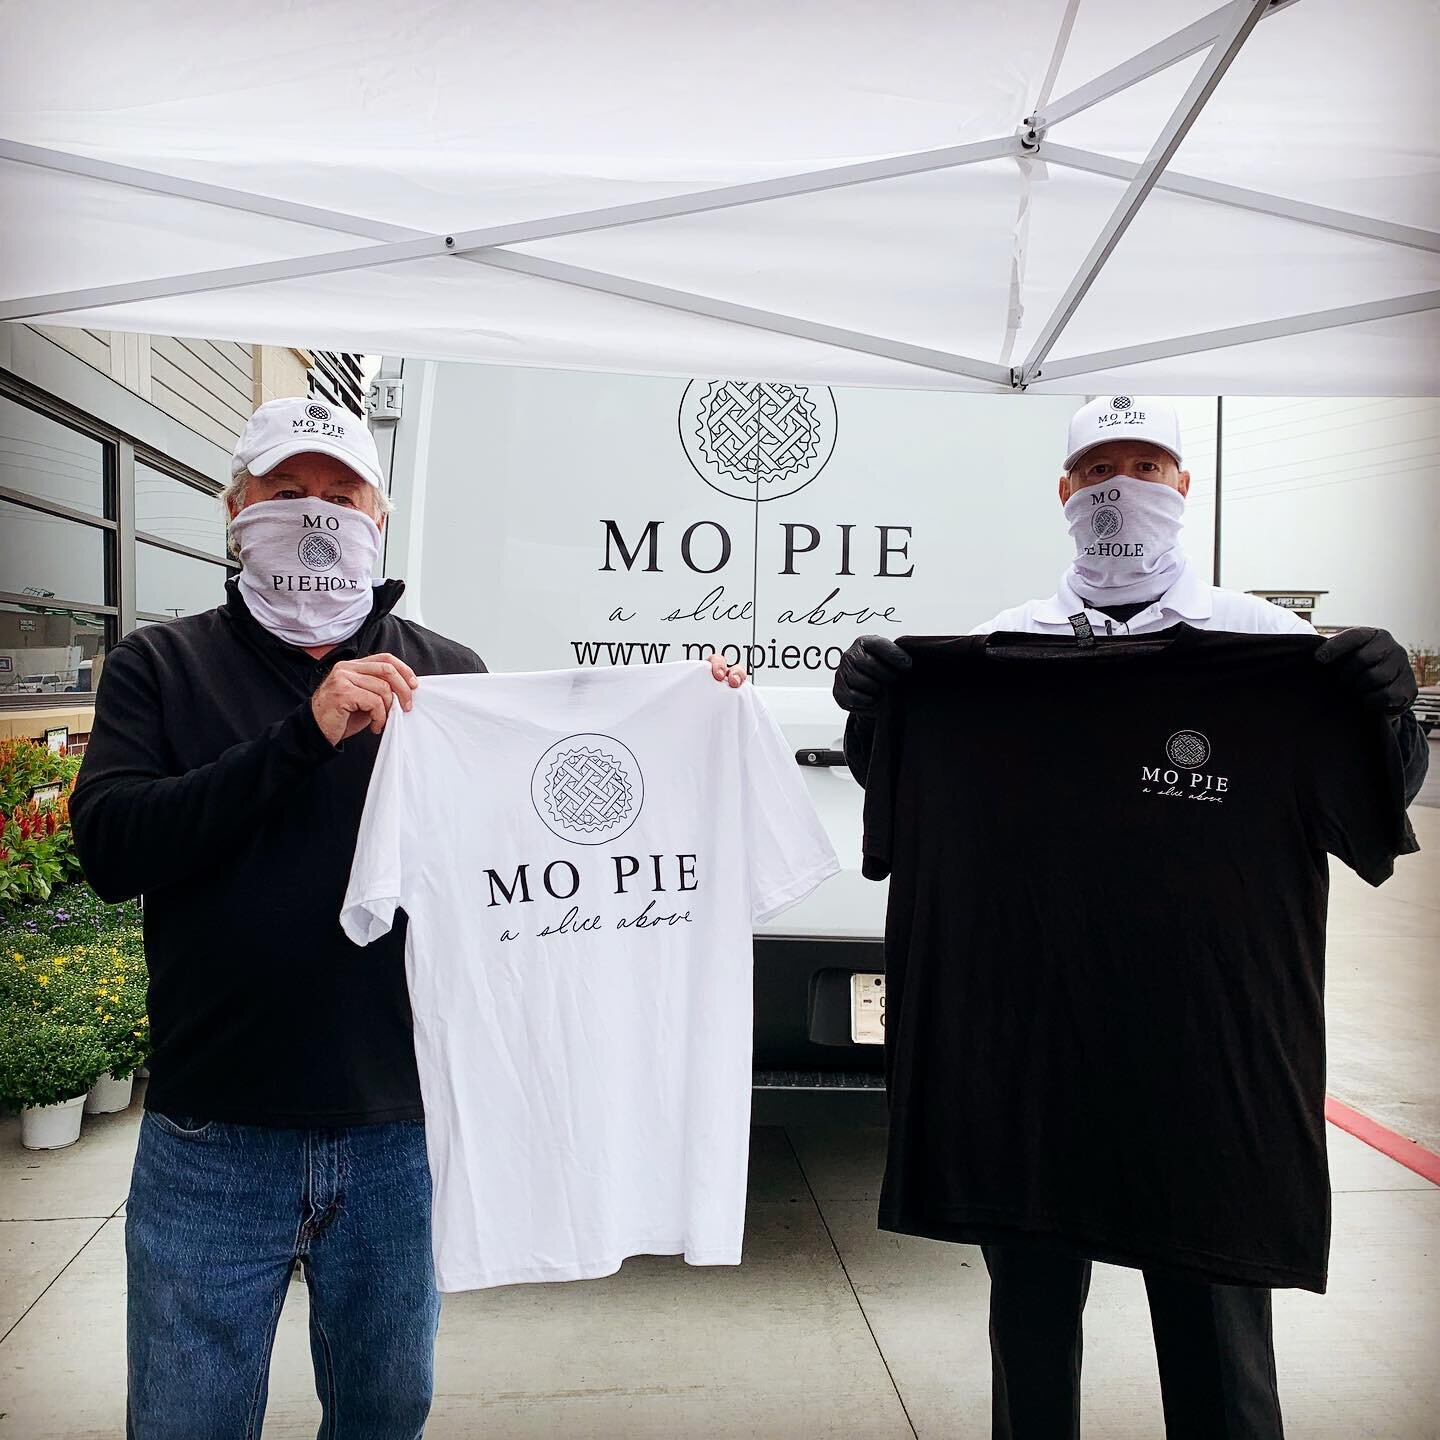 We had a blast handing out samples at the Lee&rsquo;s Summit @mckeeversmarket today!

Do you want to taste some of our delicious pies yourself? Enter our giveaway to win a MO Pie T-shirt and four-pack of mini pies!

To enter:
1. Follow @mo_pie_co on 